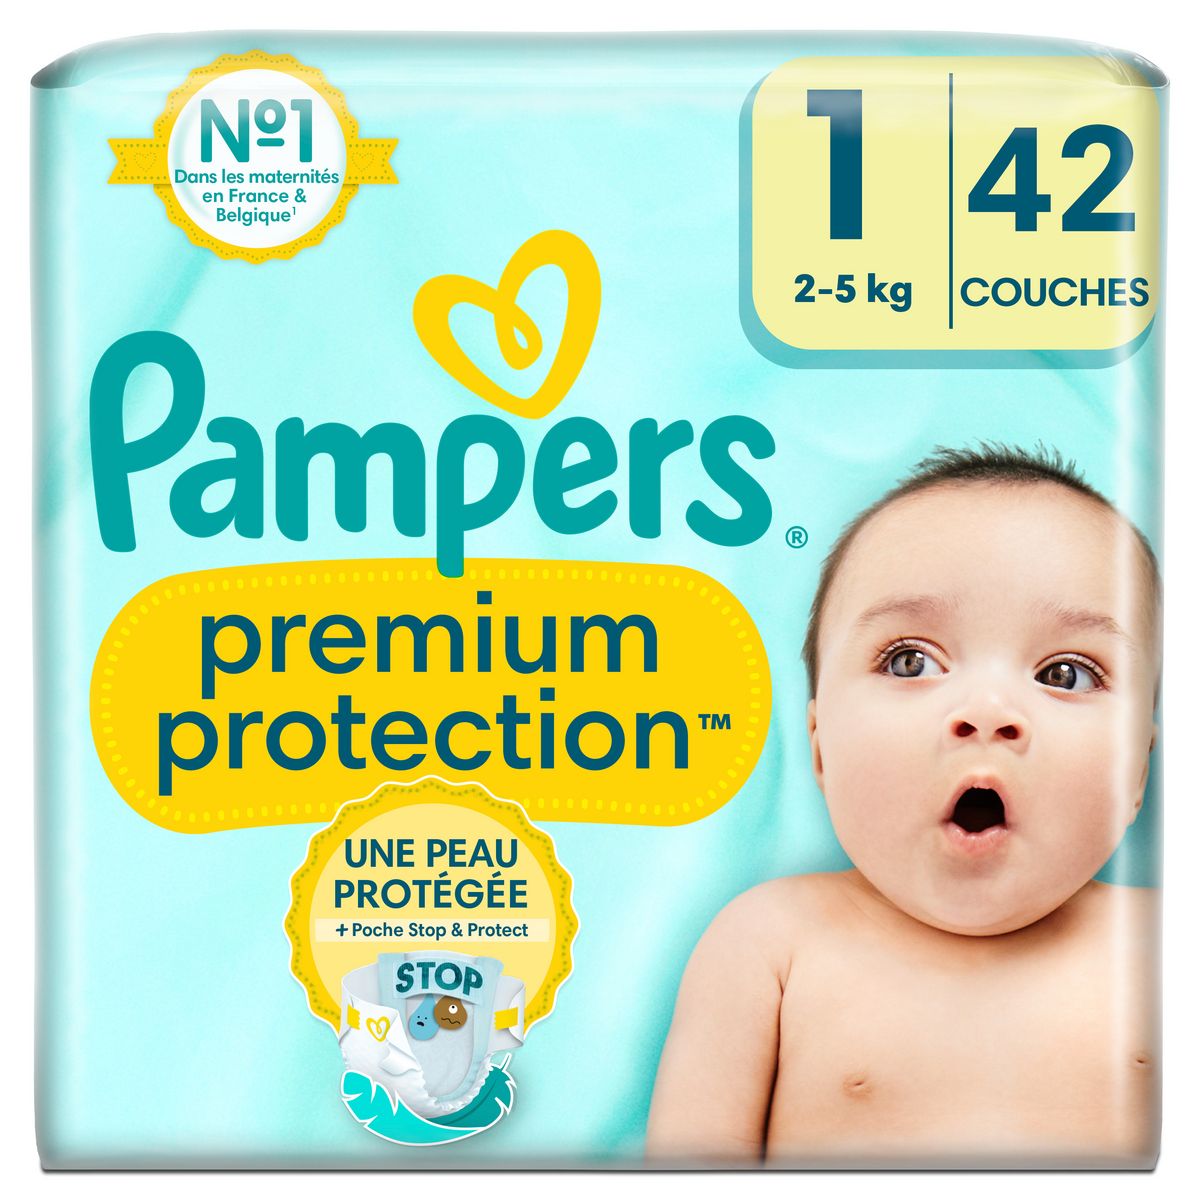 Pampers Premium Protection Taille 1, 180 Couches acheter à prix